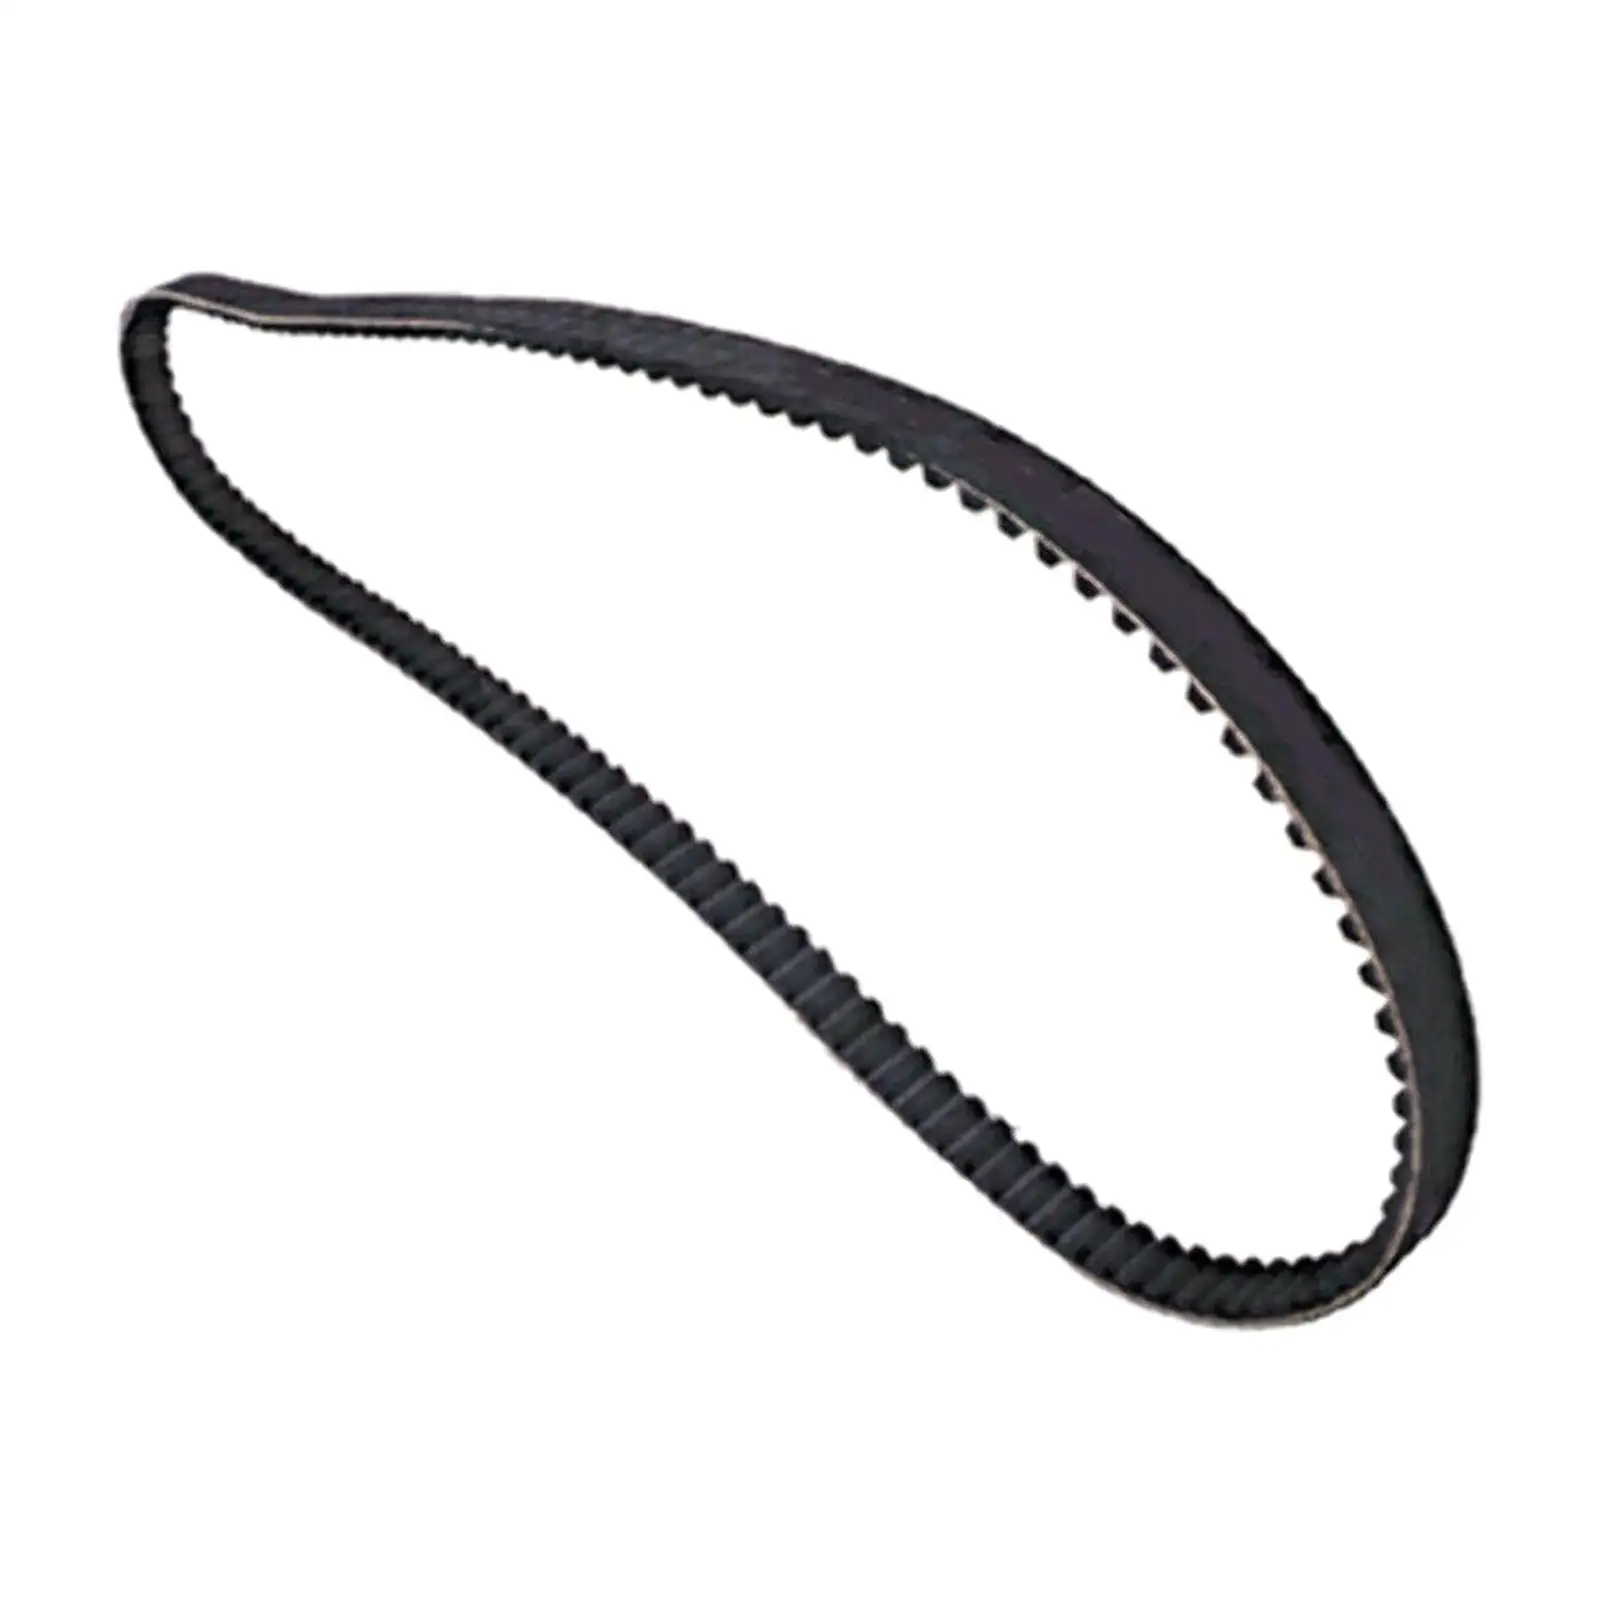 Rear Drive Belt 133 Tooth 1 1/8